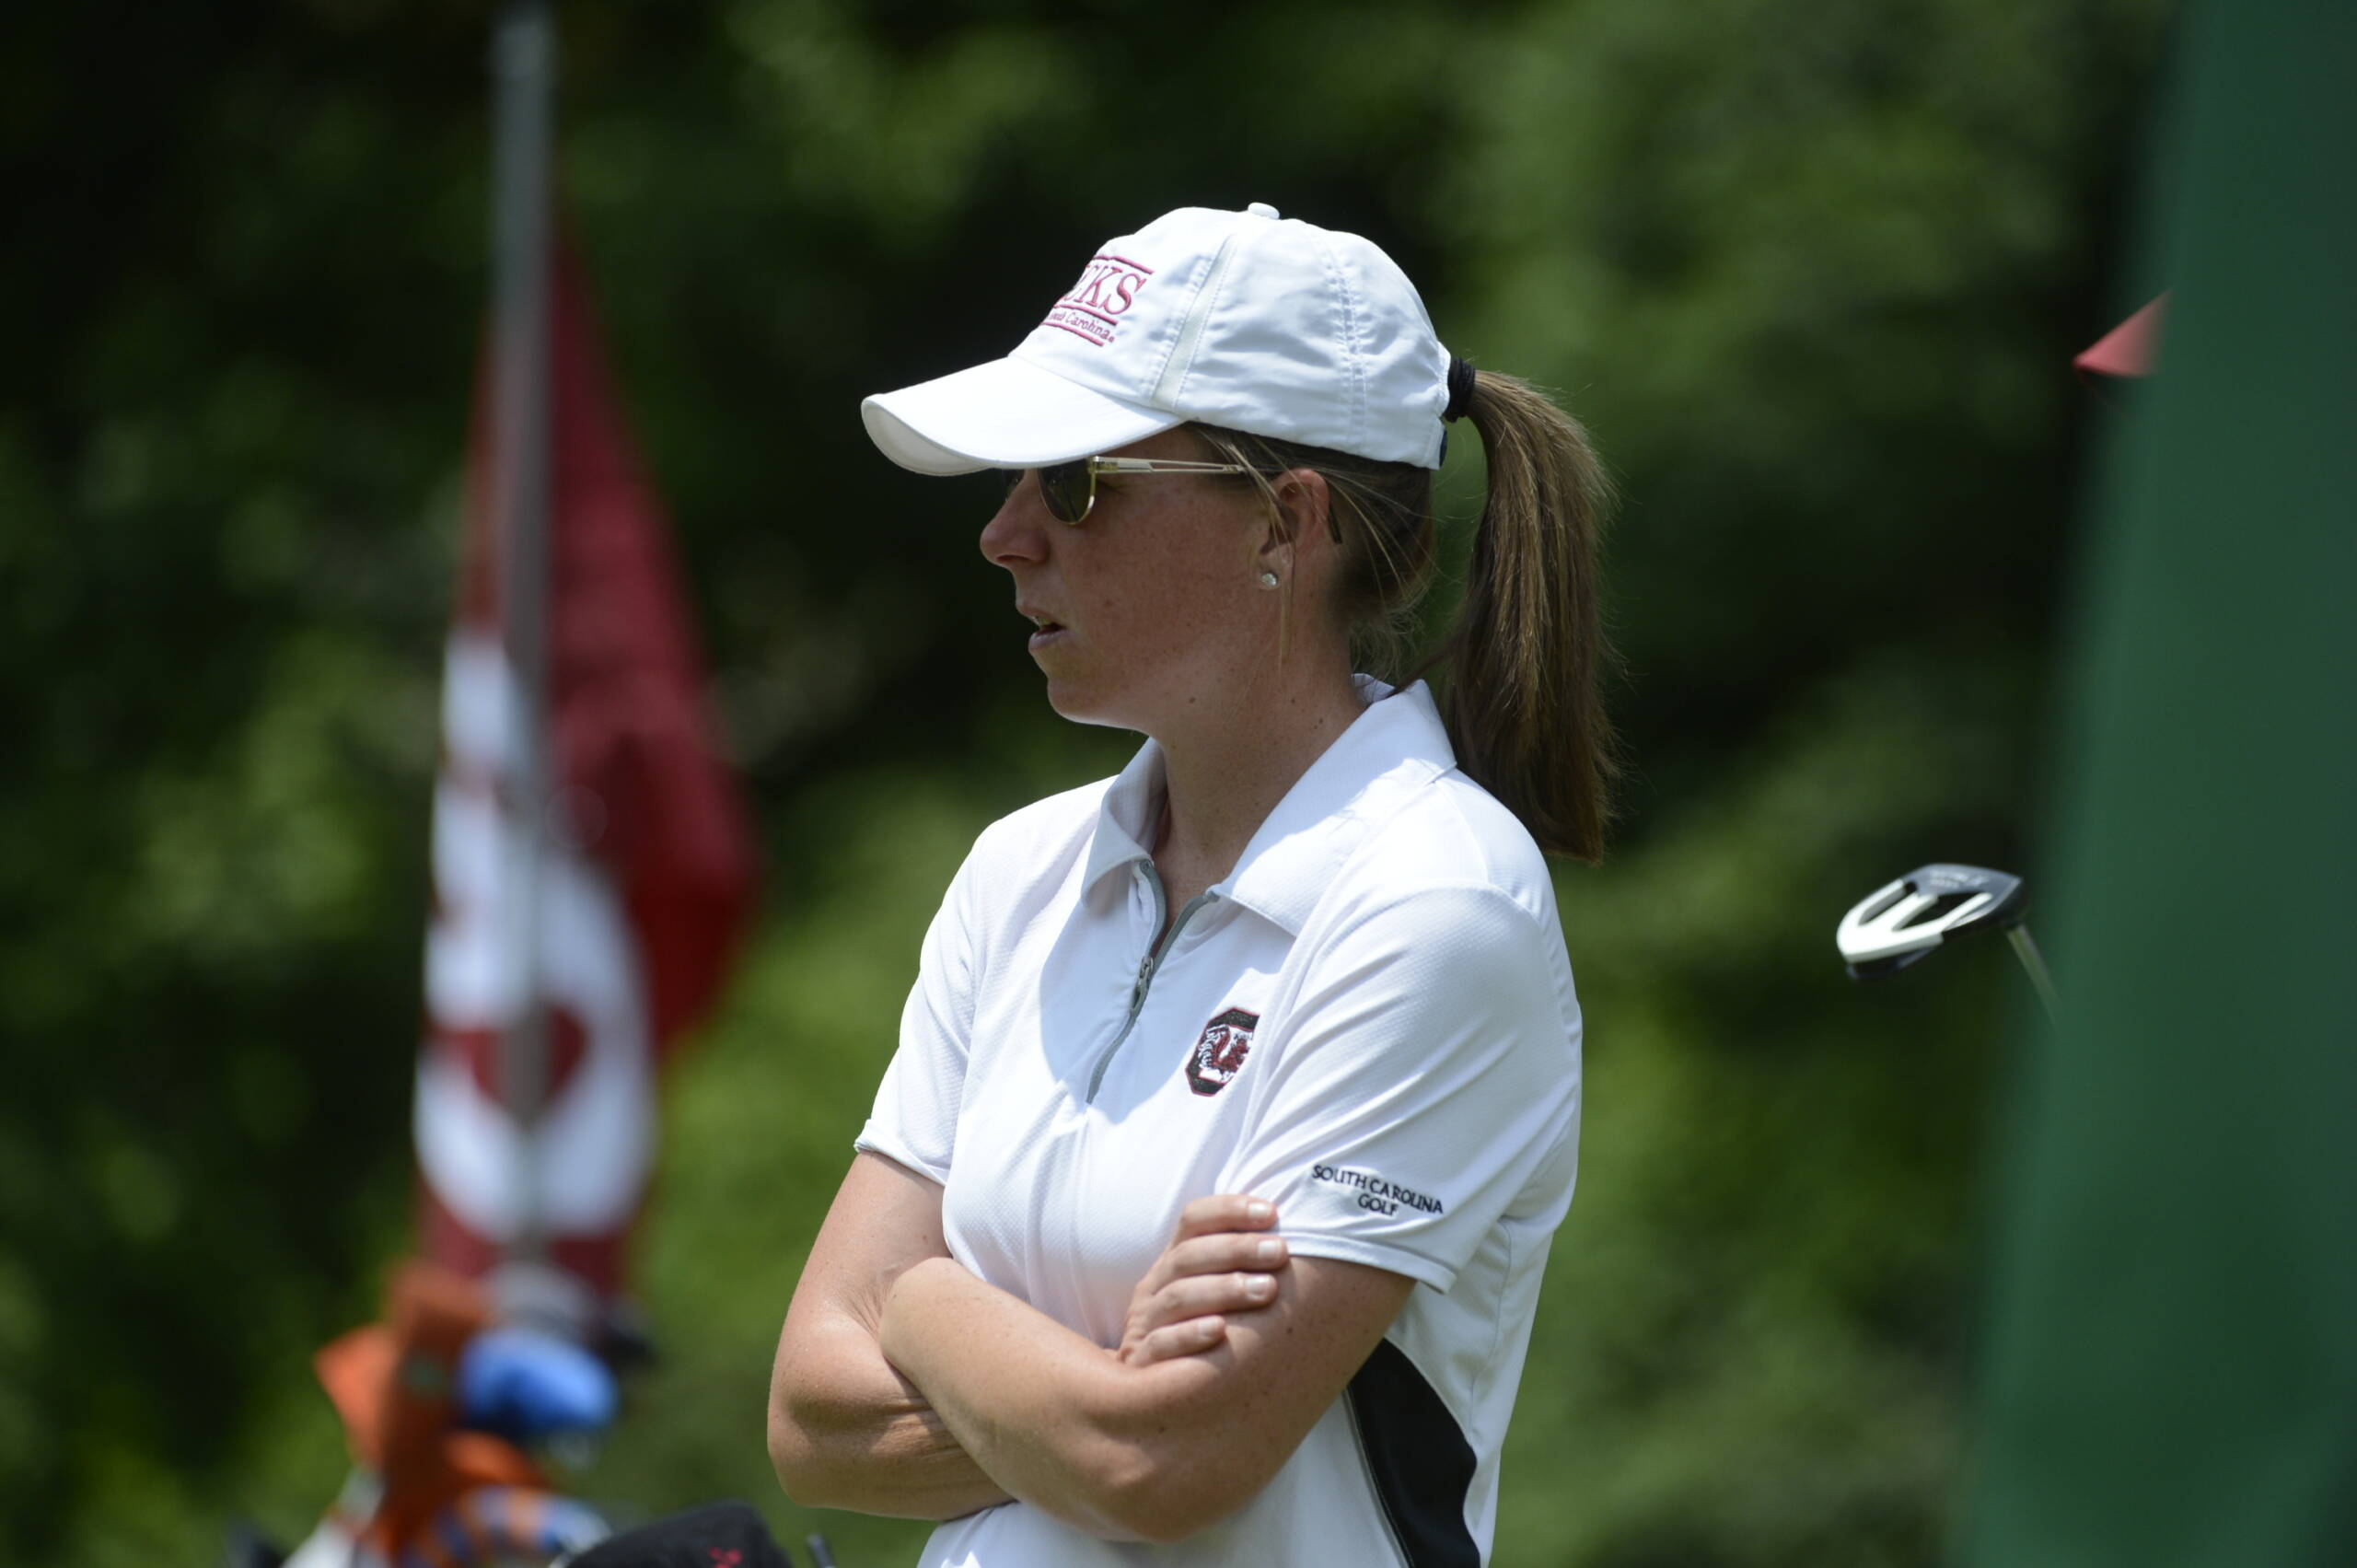 Gamecocks Finish in Second Place at the SEC Championship